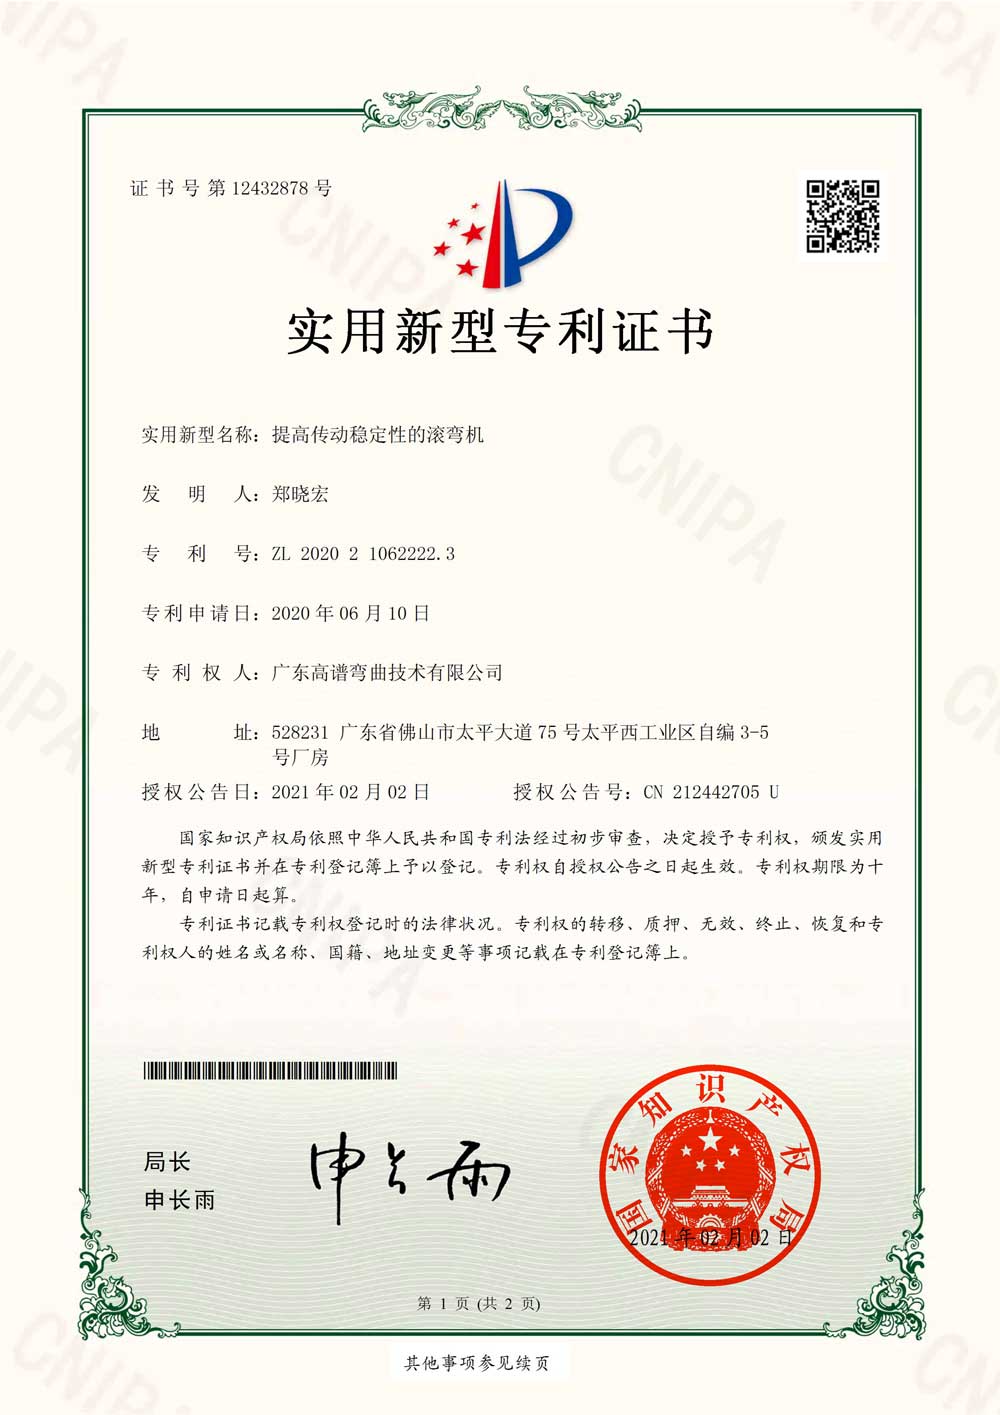 Patent certificate of rolling and bending machine for improving transmission stability